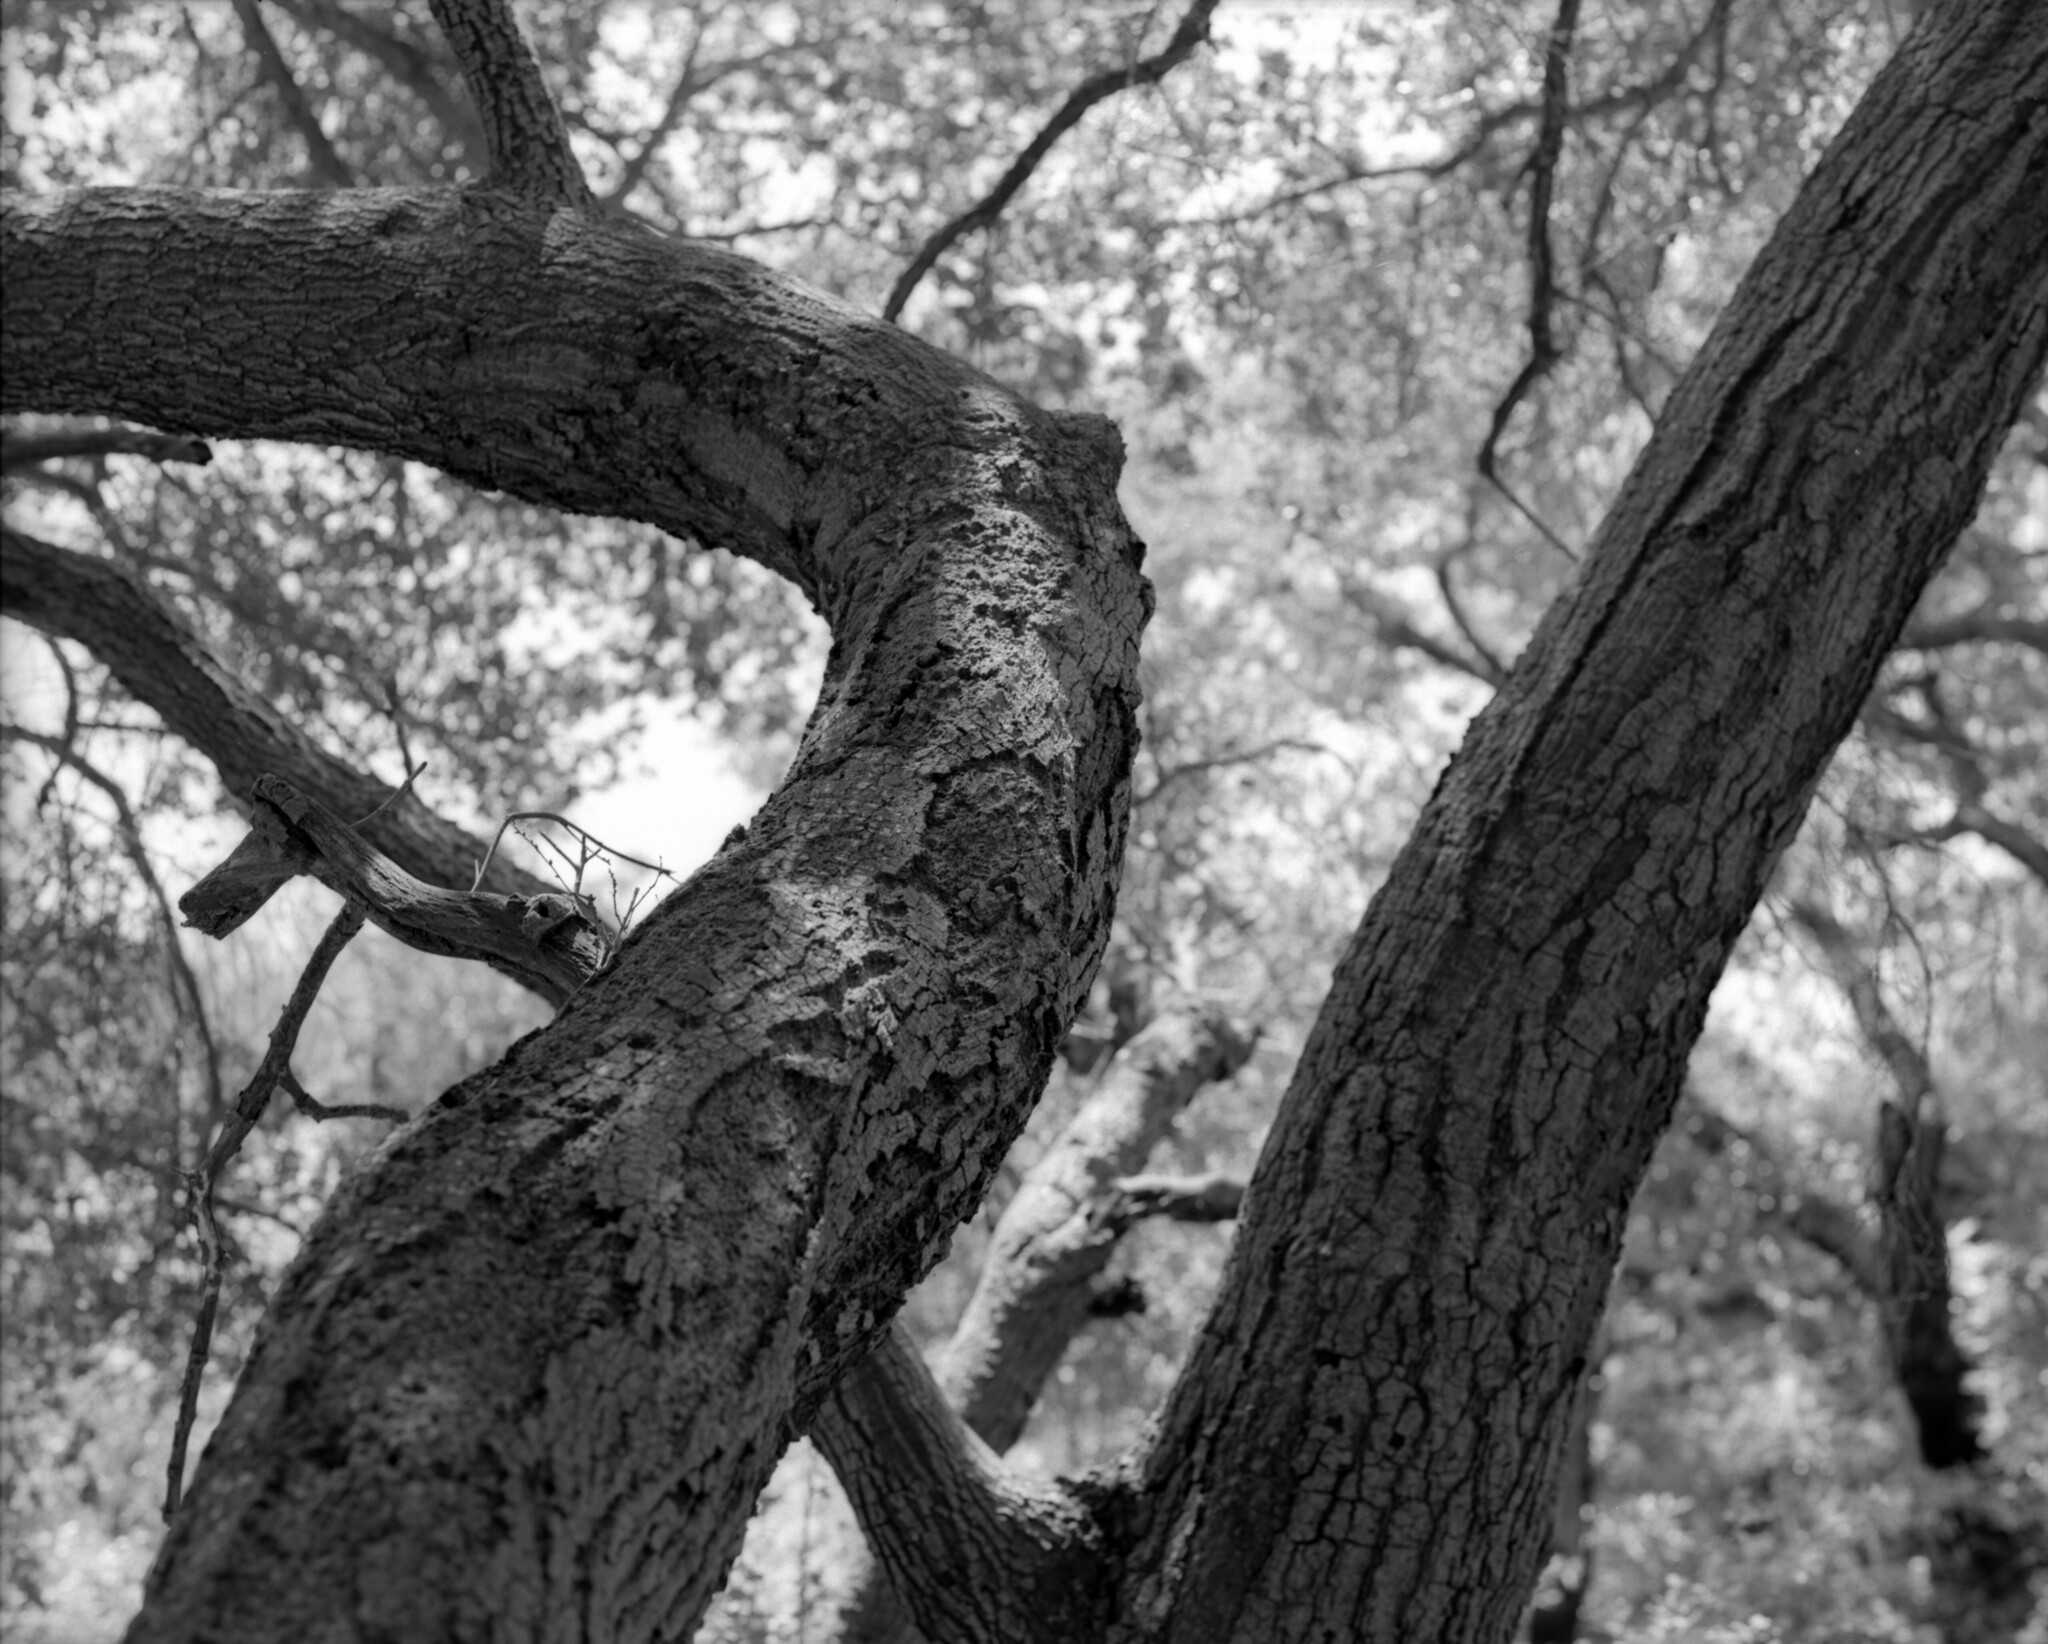 Black and white photo of trunks of two live oak trees. The bark is a darker color with a more well-lit forest background